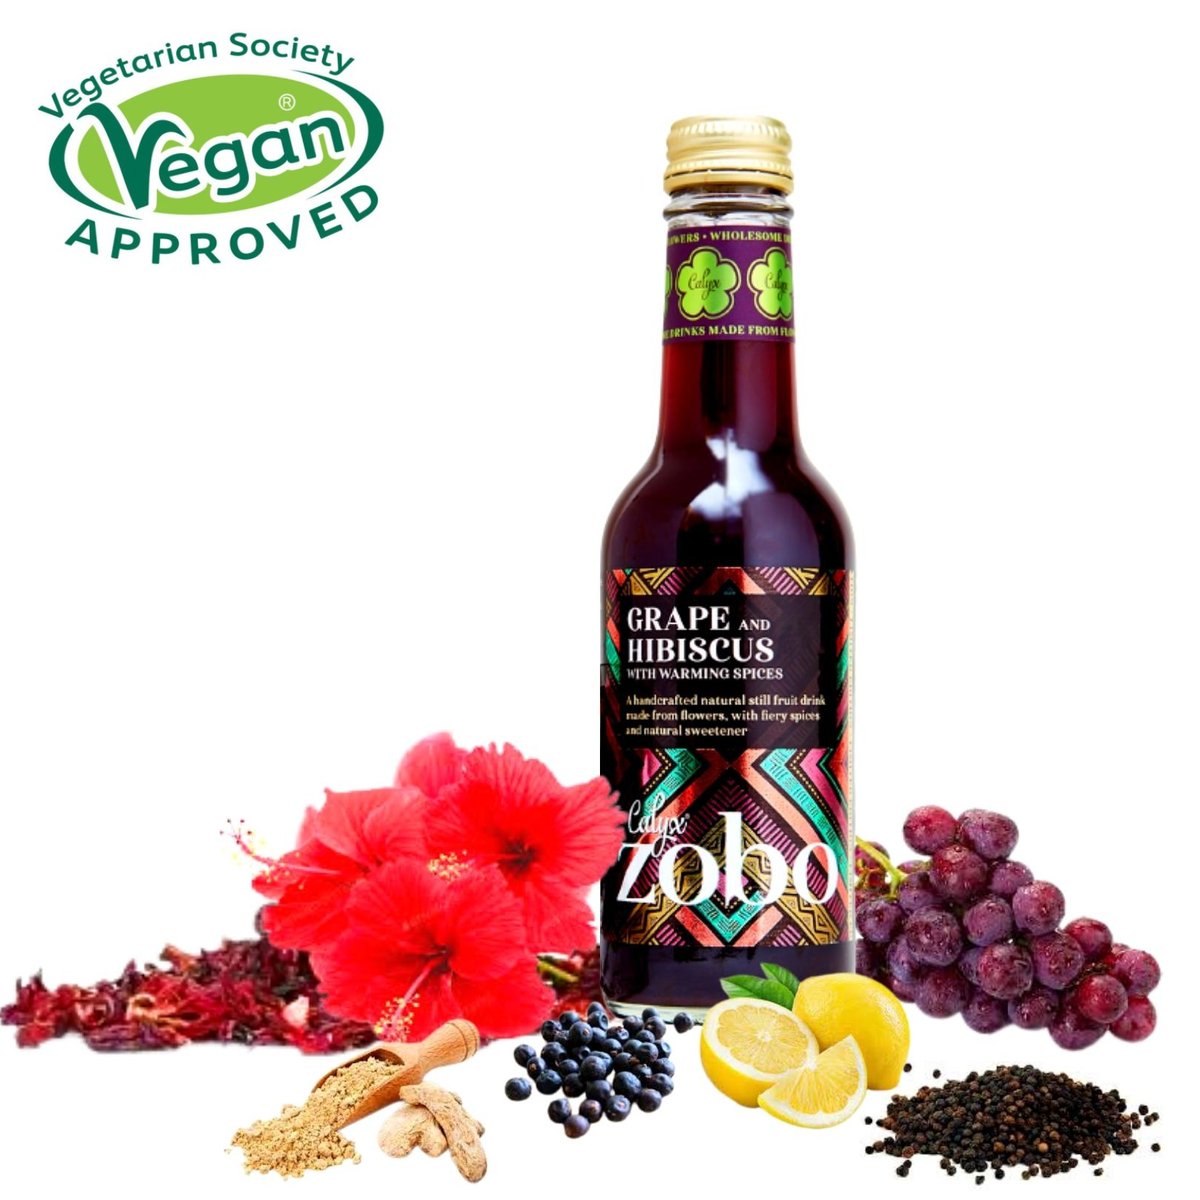 Dive into a world of flavour with @calyxdrinks Apple and Hibiscus flower fruit drink - the perfect blend of sweetness and floral notes in every sip!🍎🌺 #Vegan approved by @vegsoc💛 #VegetarianSocietyApproved # #CalyxDrinks #FruitDrink #FlavorfulSips #HibiscusFlavor #AppleDrink